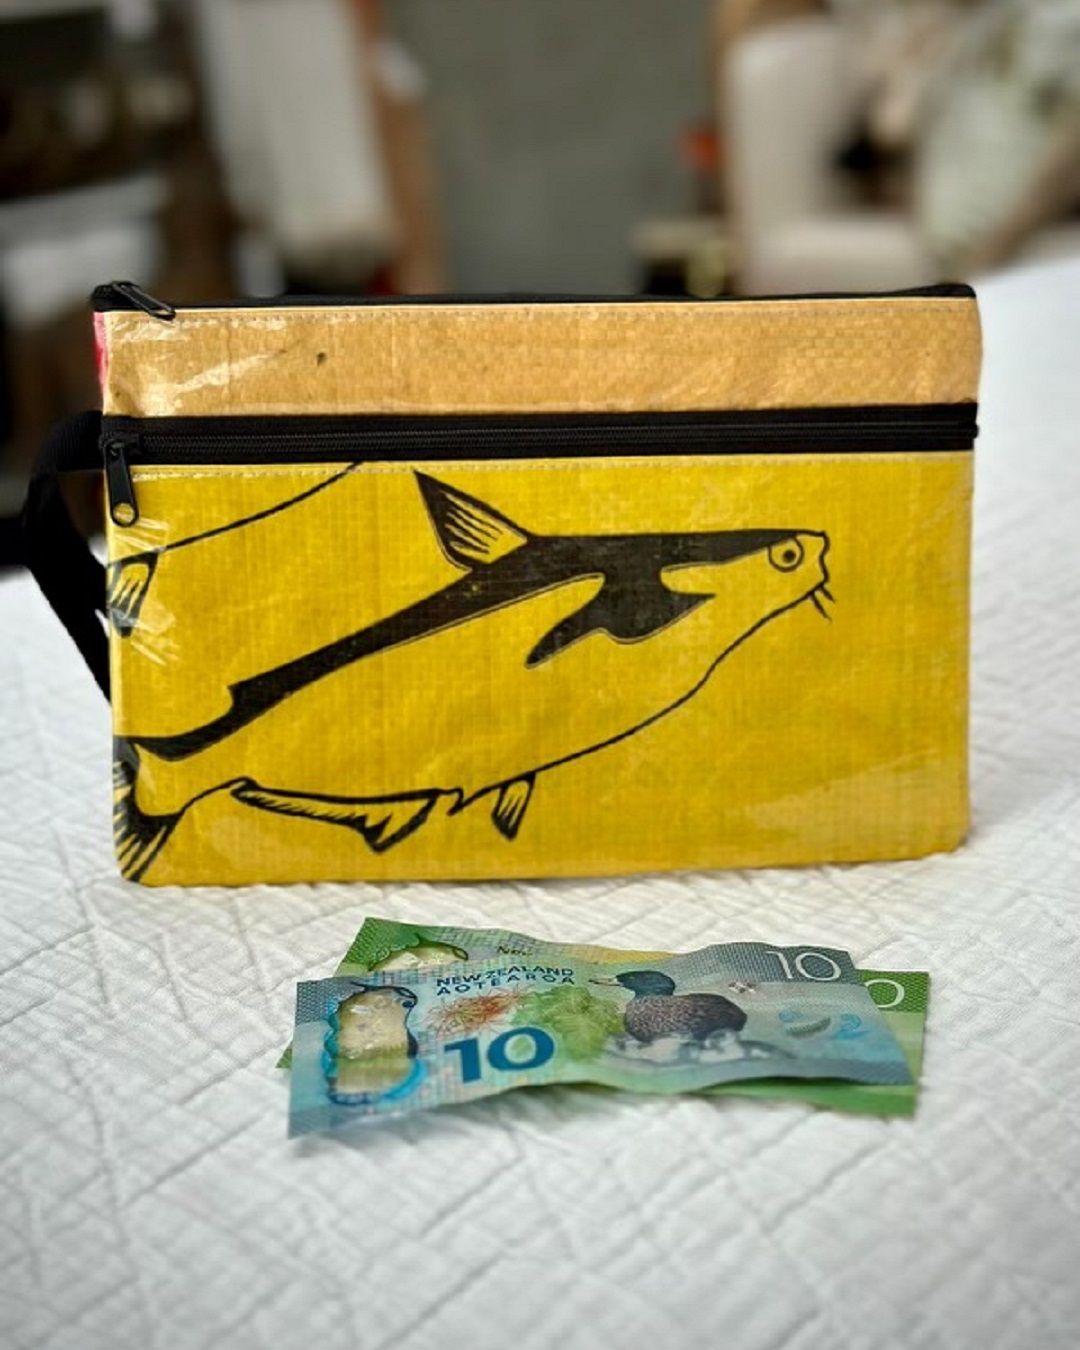 Yellow fish purse on bed